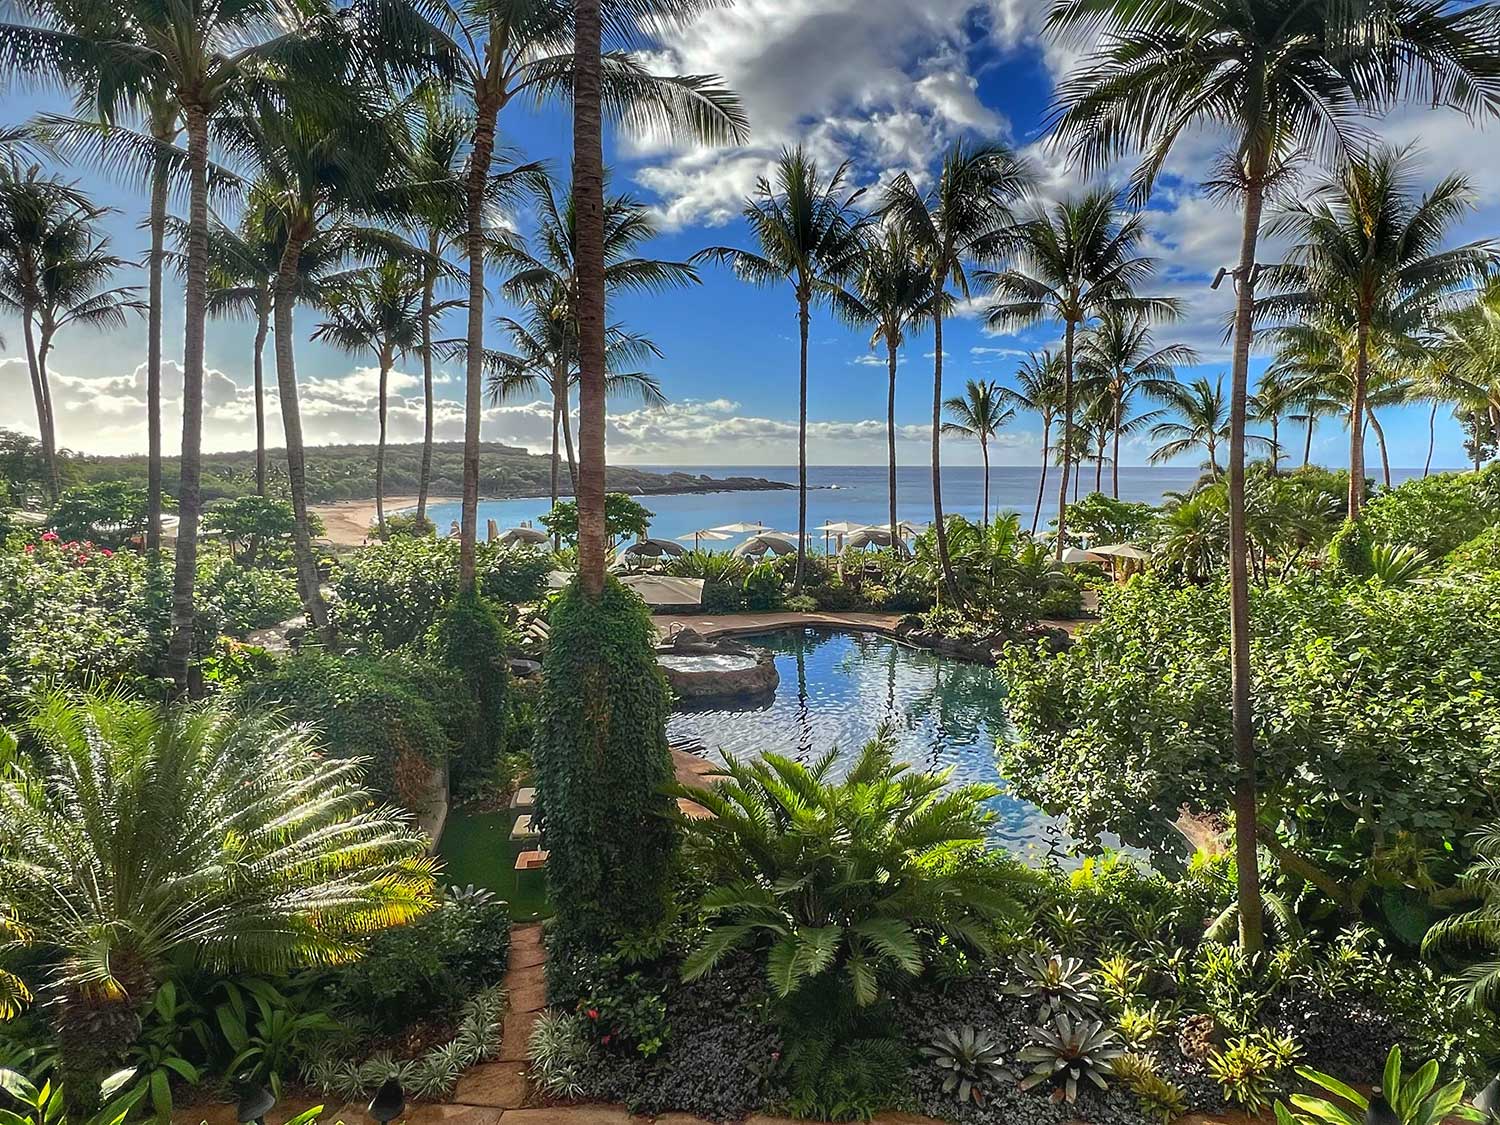 View of the tropical enviornment of the Four Seasons Lanai.